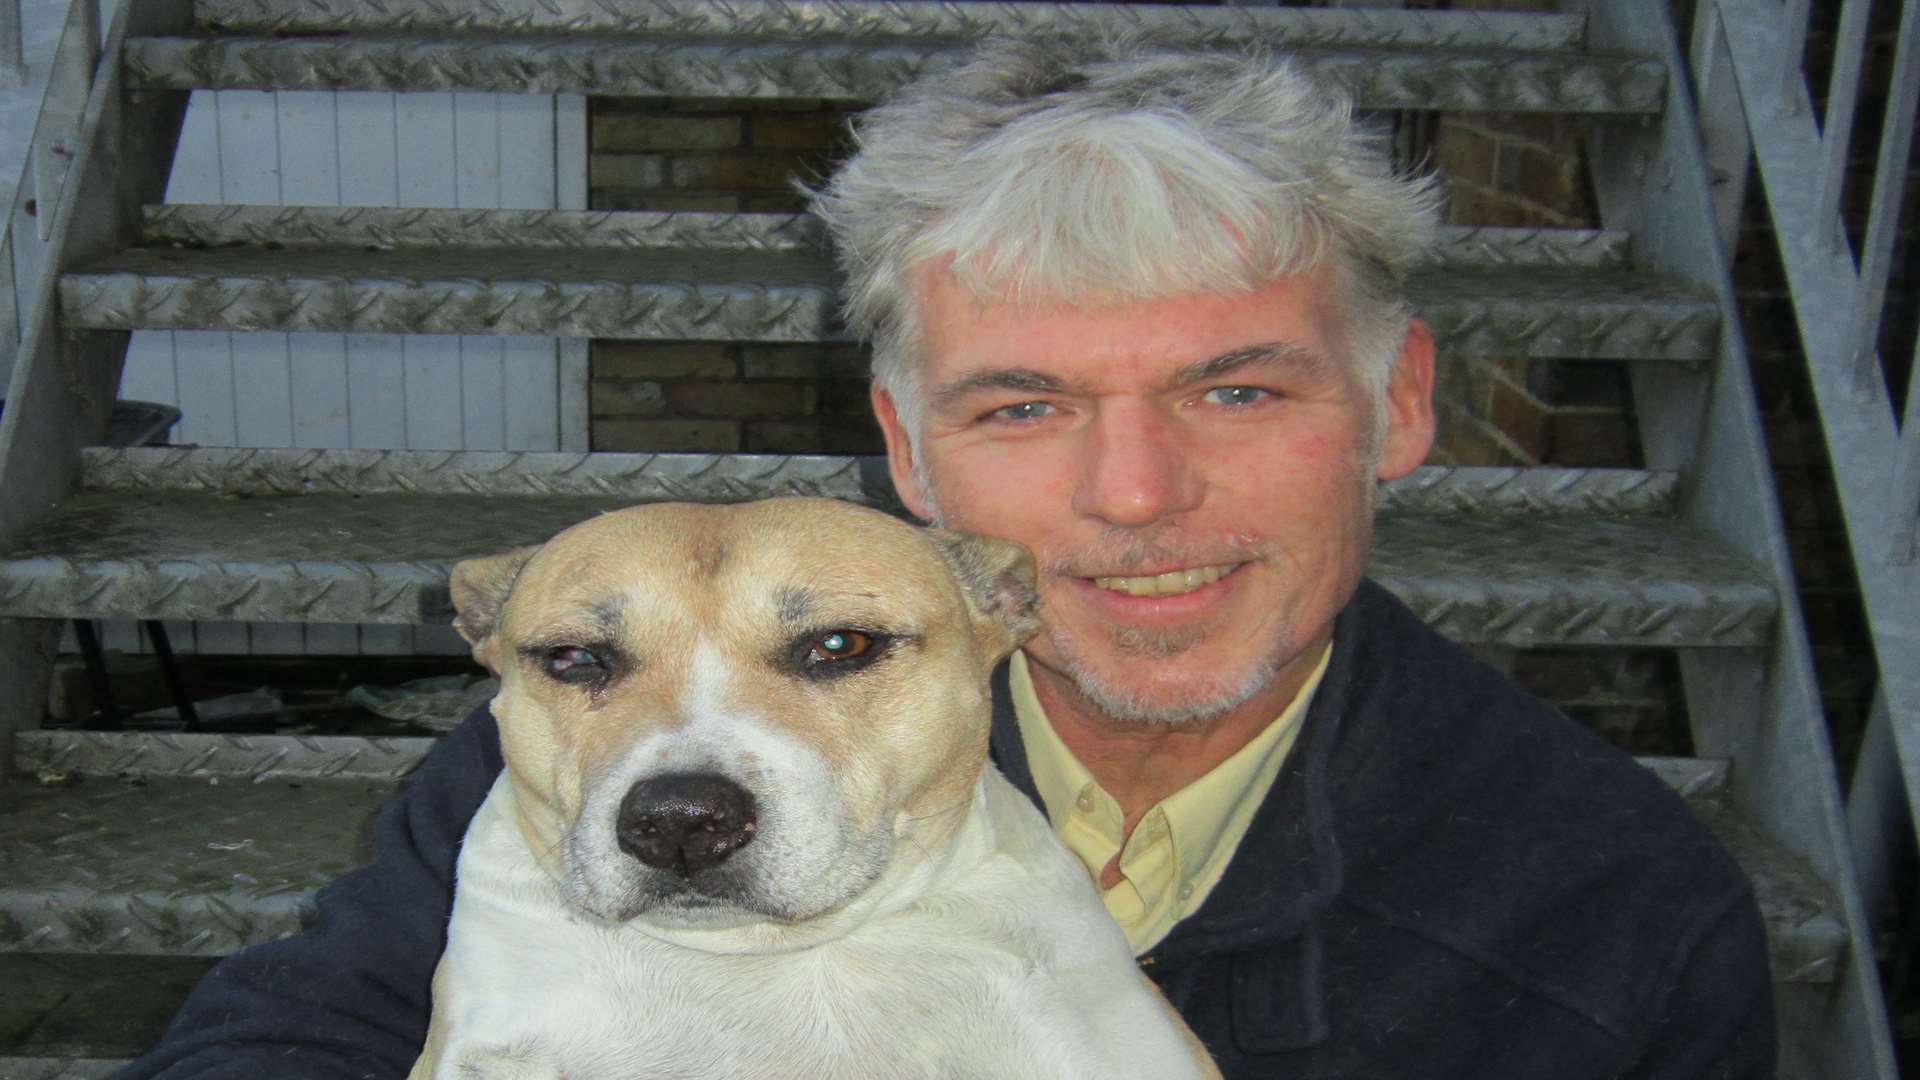 Glenn Hall, pictured with another dog